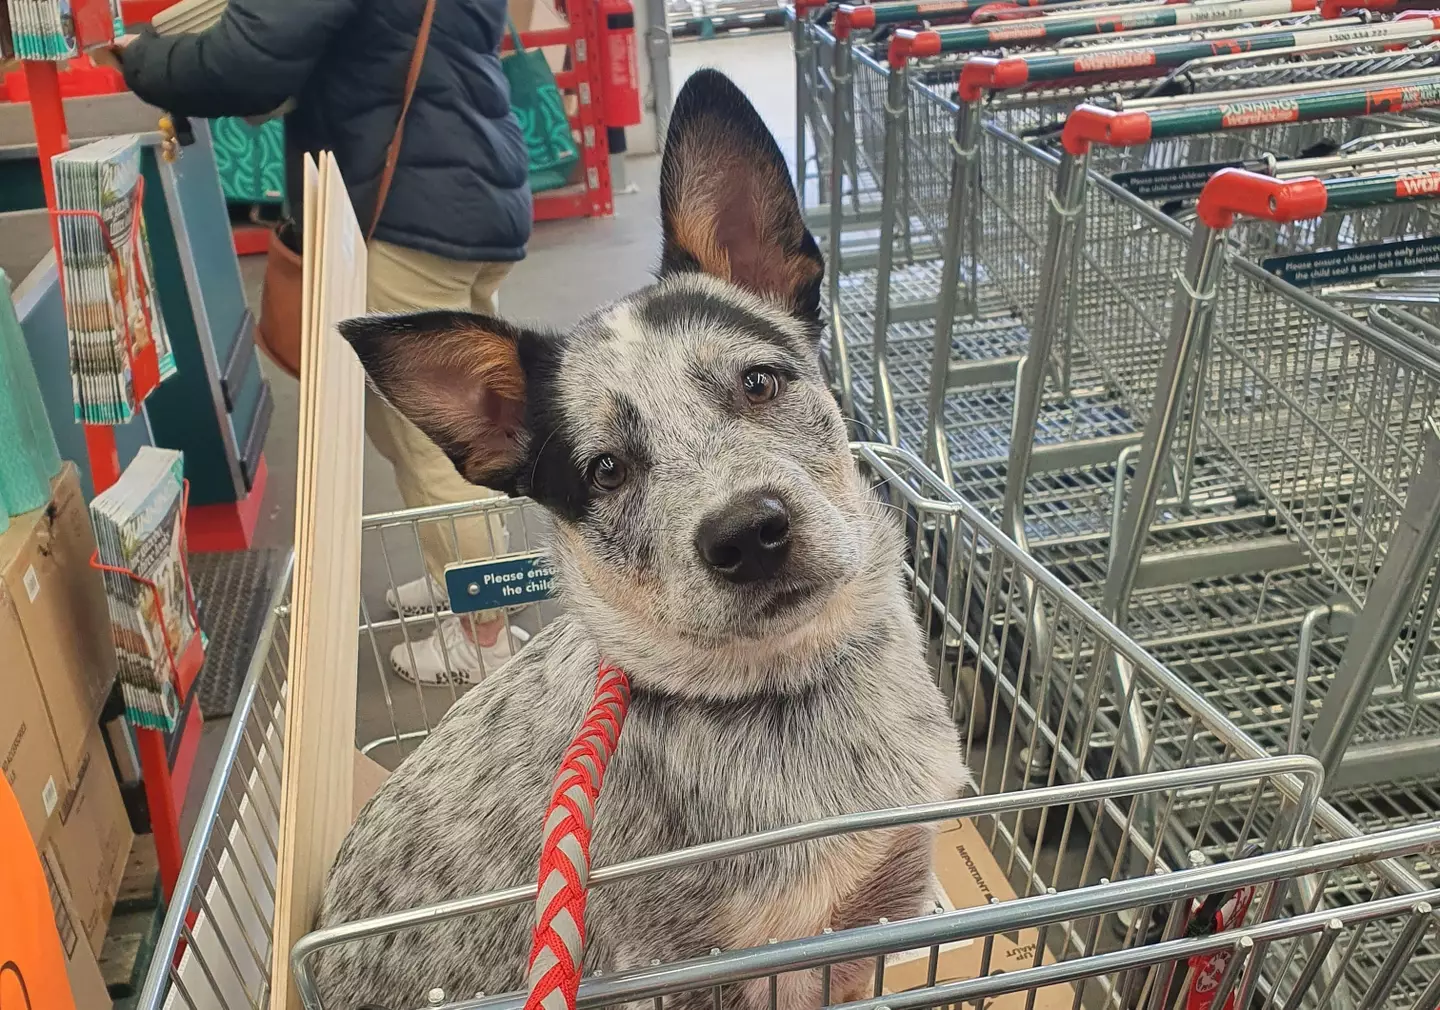 Barney’s first visit to Bunnings will melt your heart.